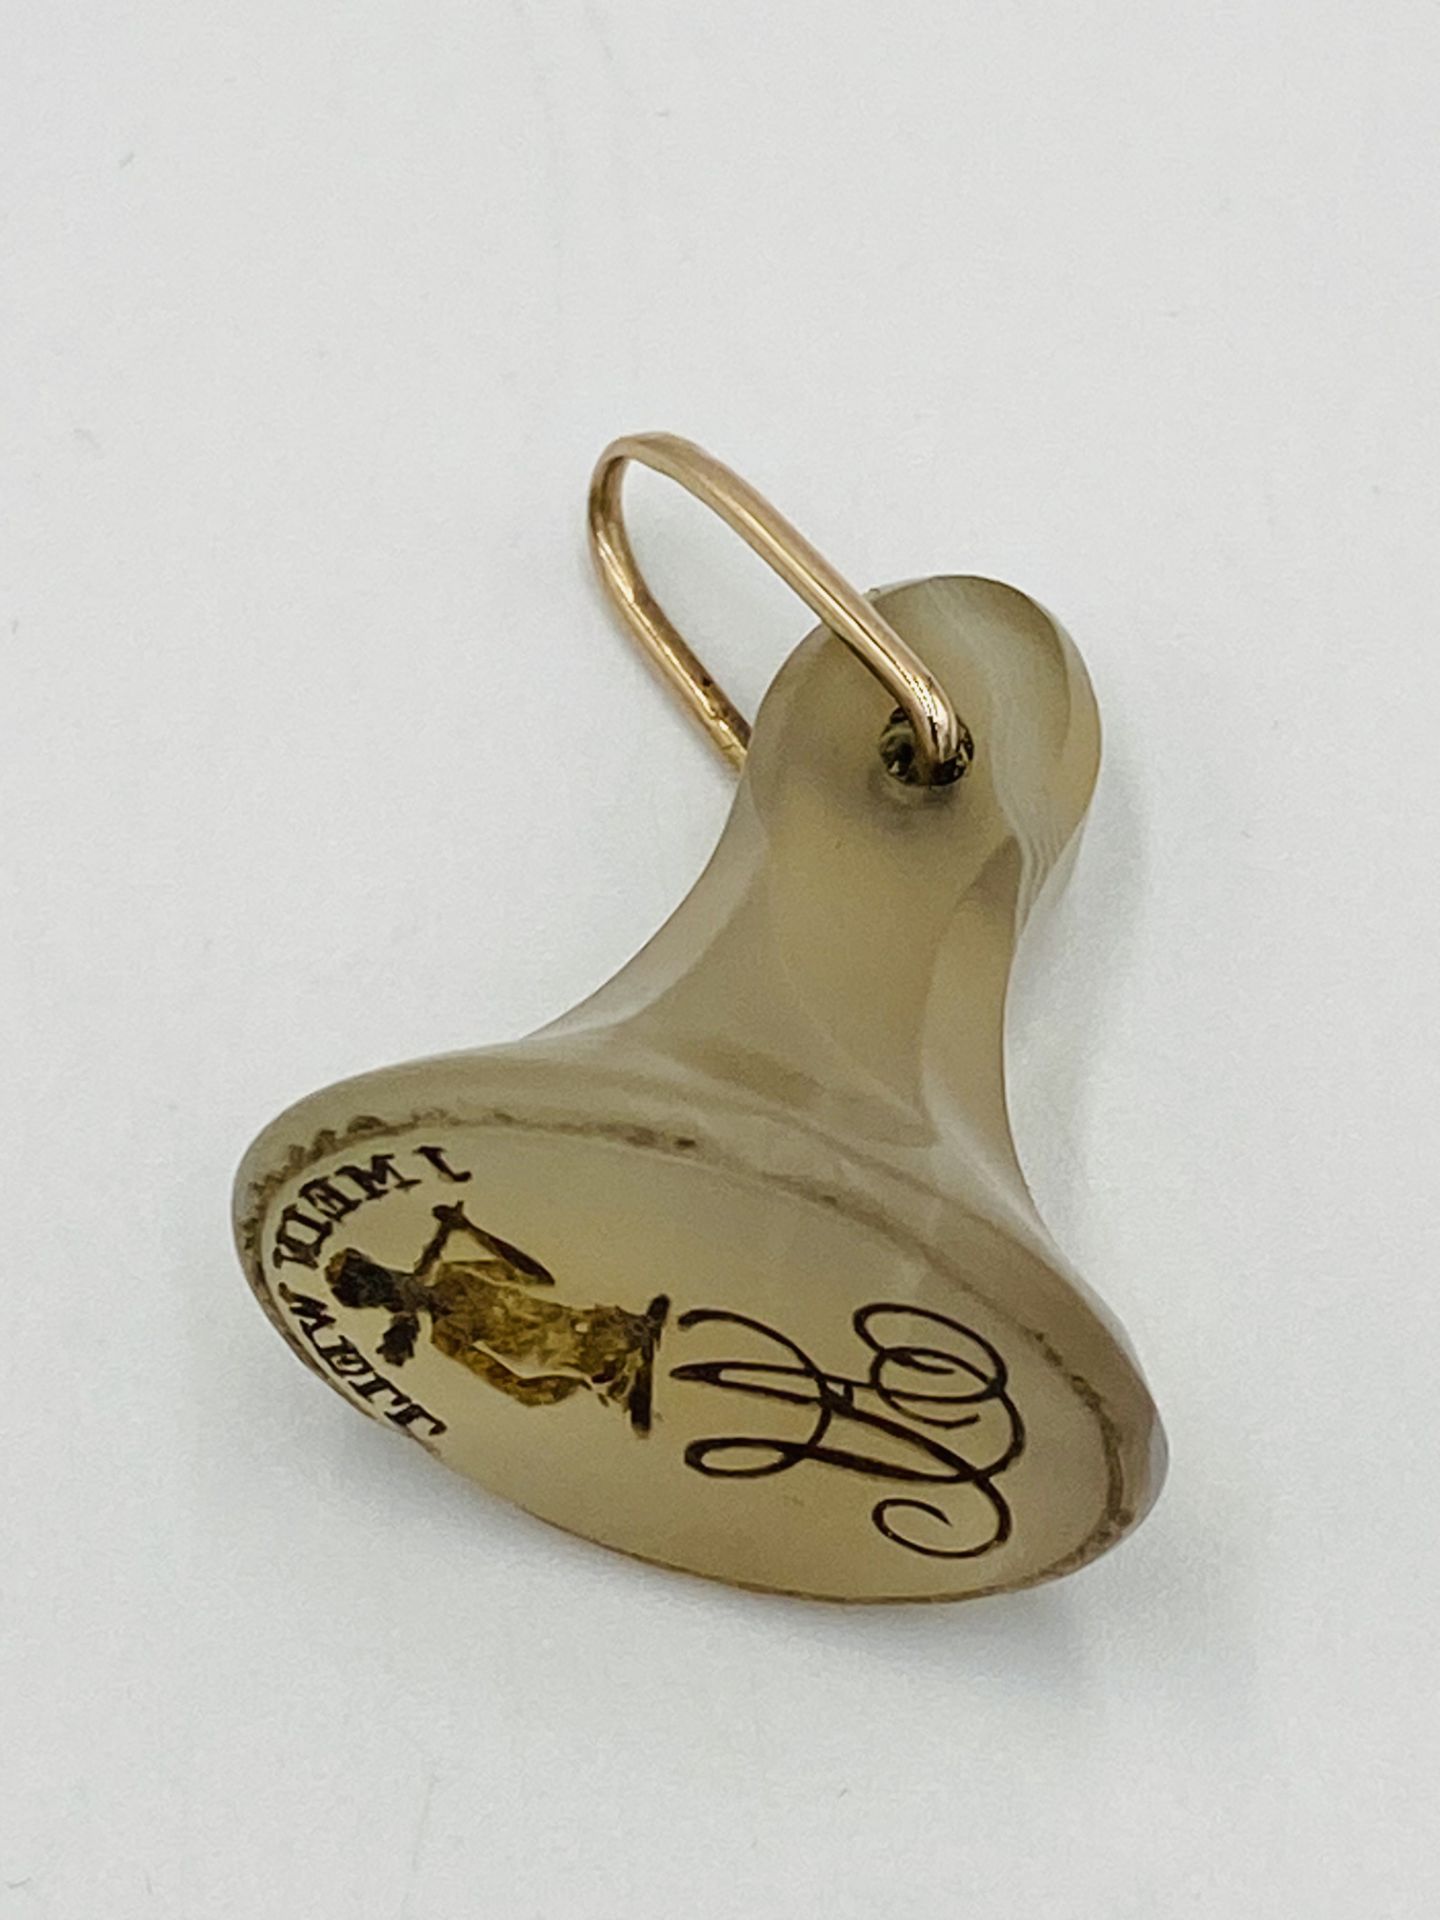 Fob seal pendant - Image 2 of 3